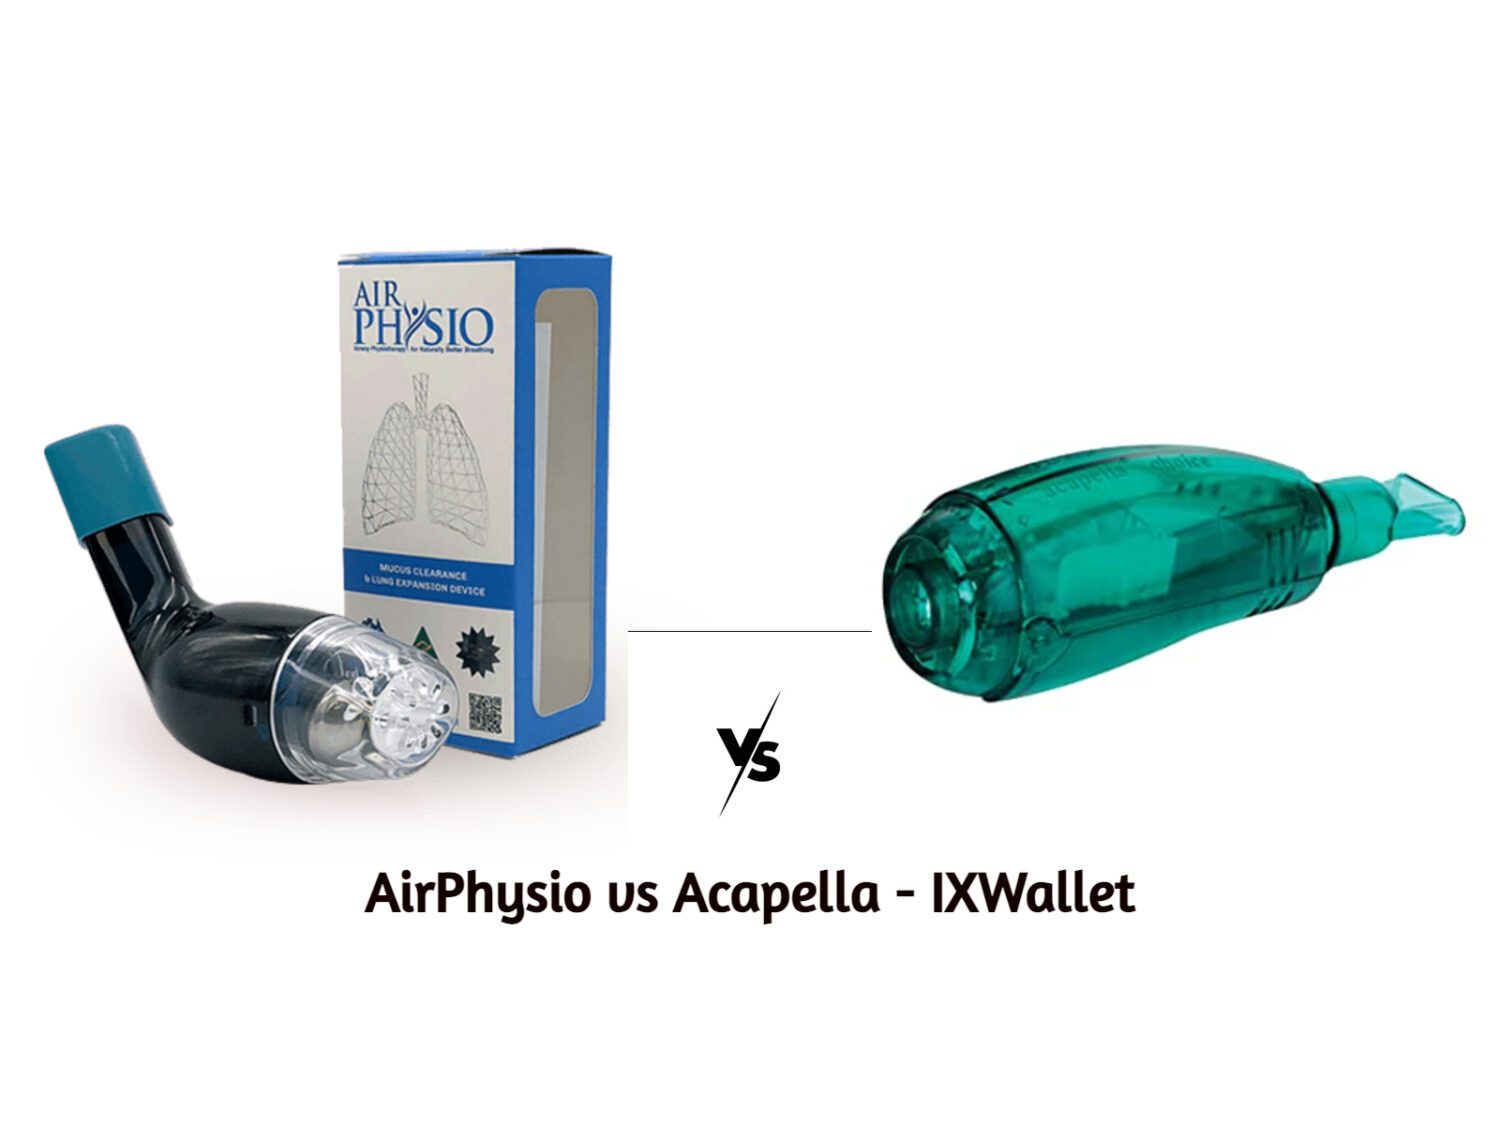 An image of Airphysio vs Acapella